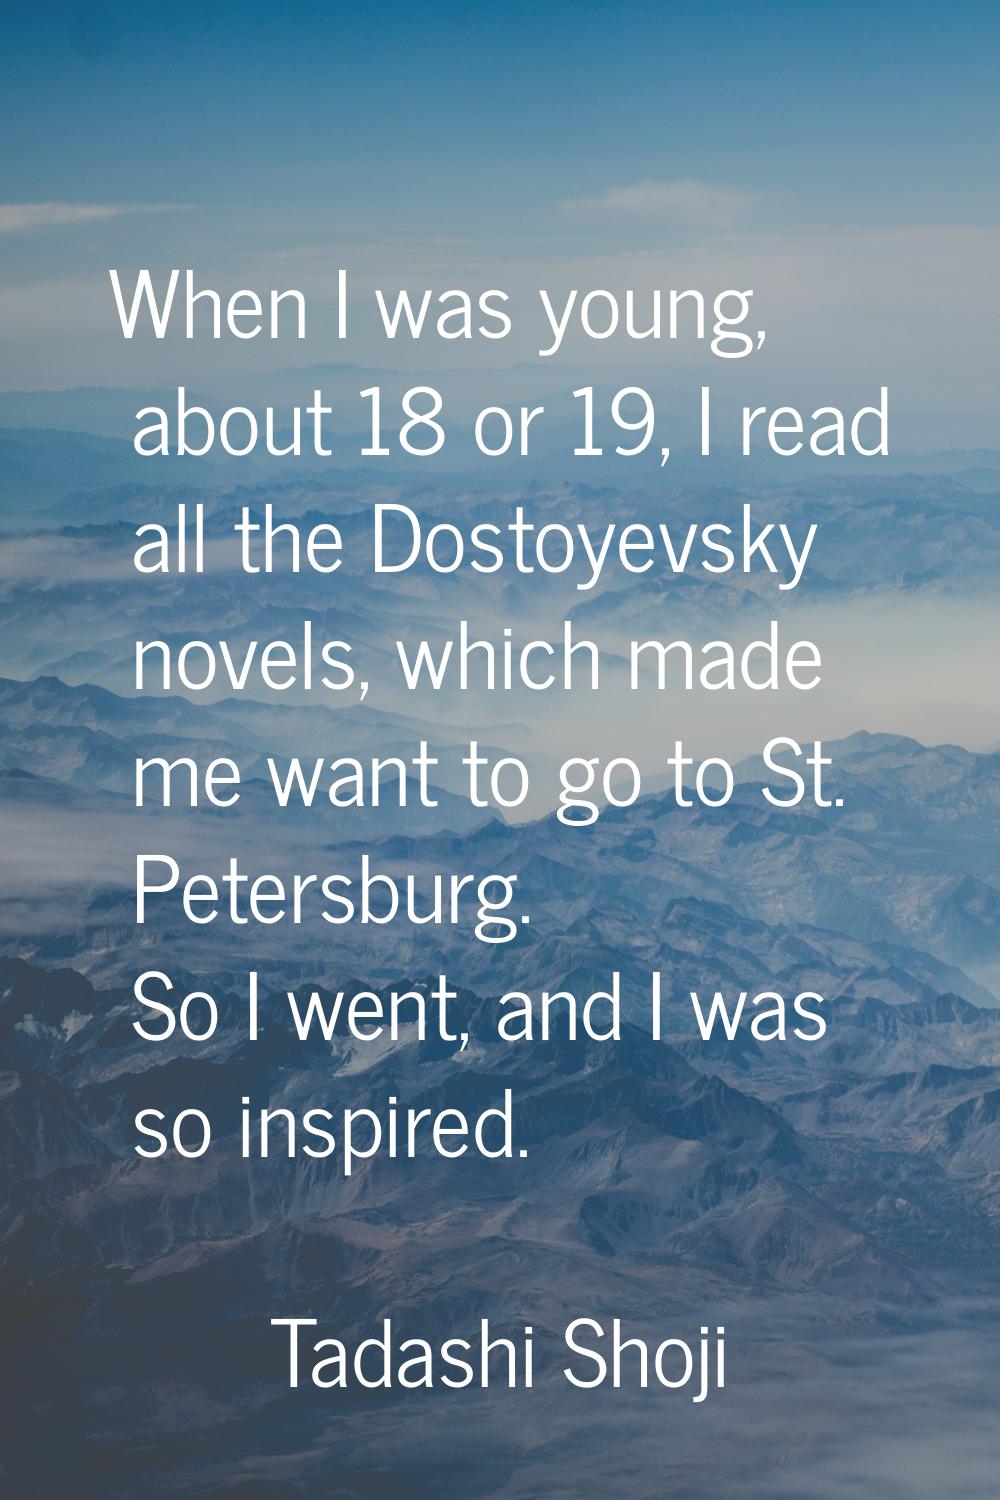 When I was young, about 18 or 19, I read all the Dostoyevsky novels, which made me want to go to St